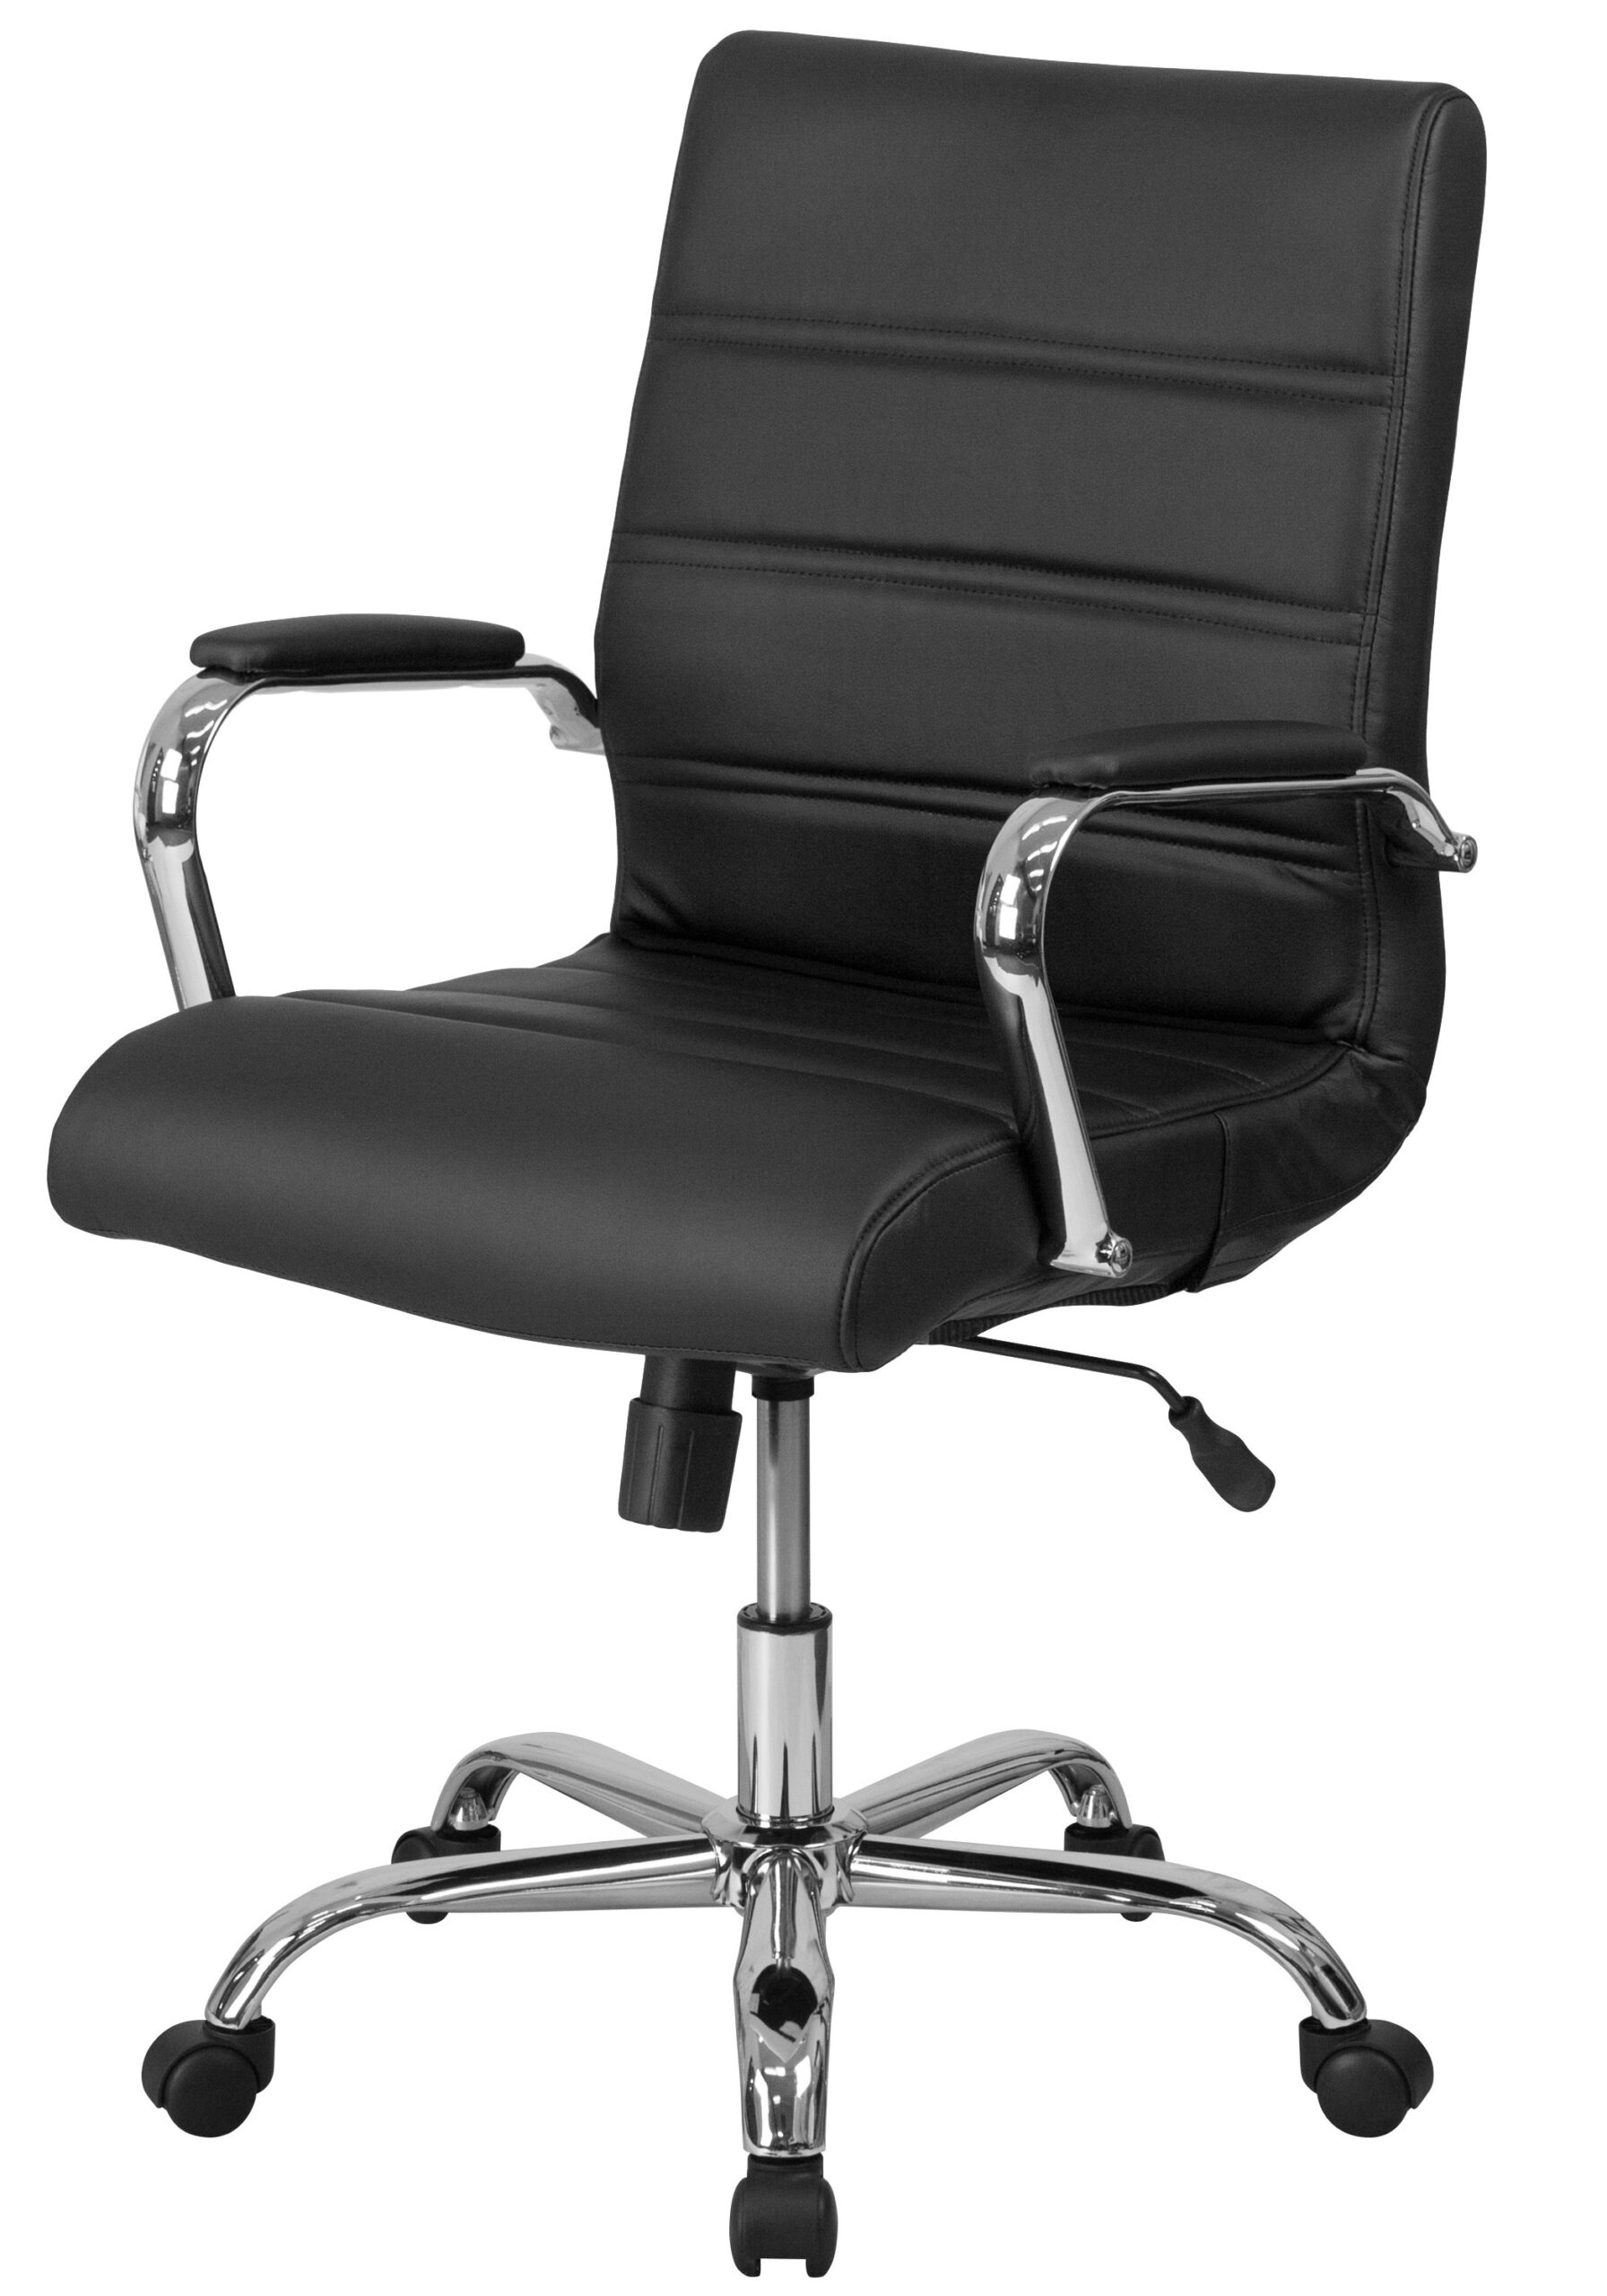 2020 Latest Executive Office Chairs Without Arms Scaled 